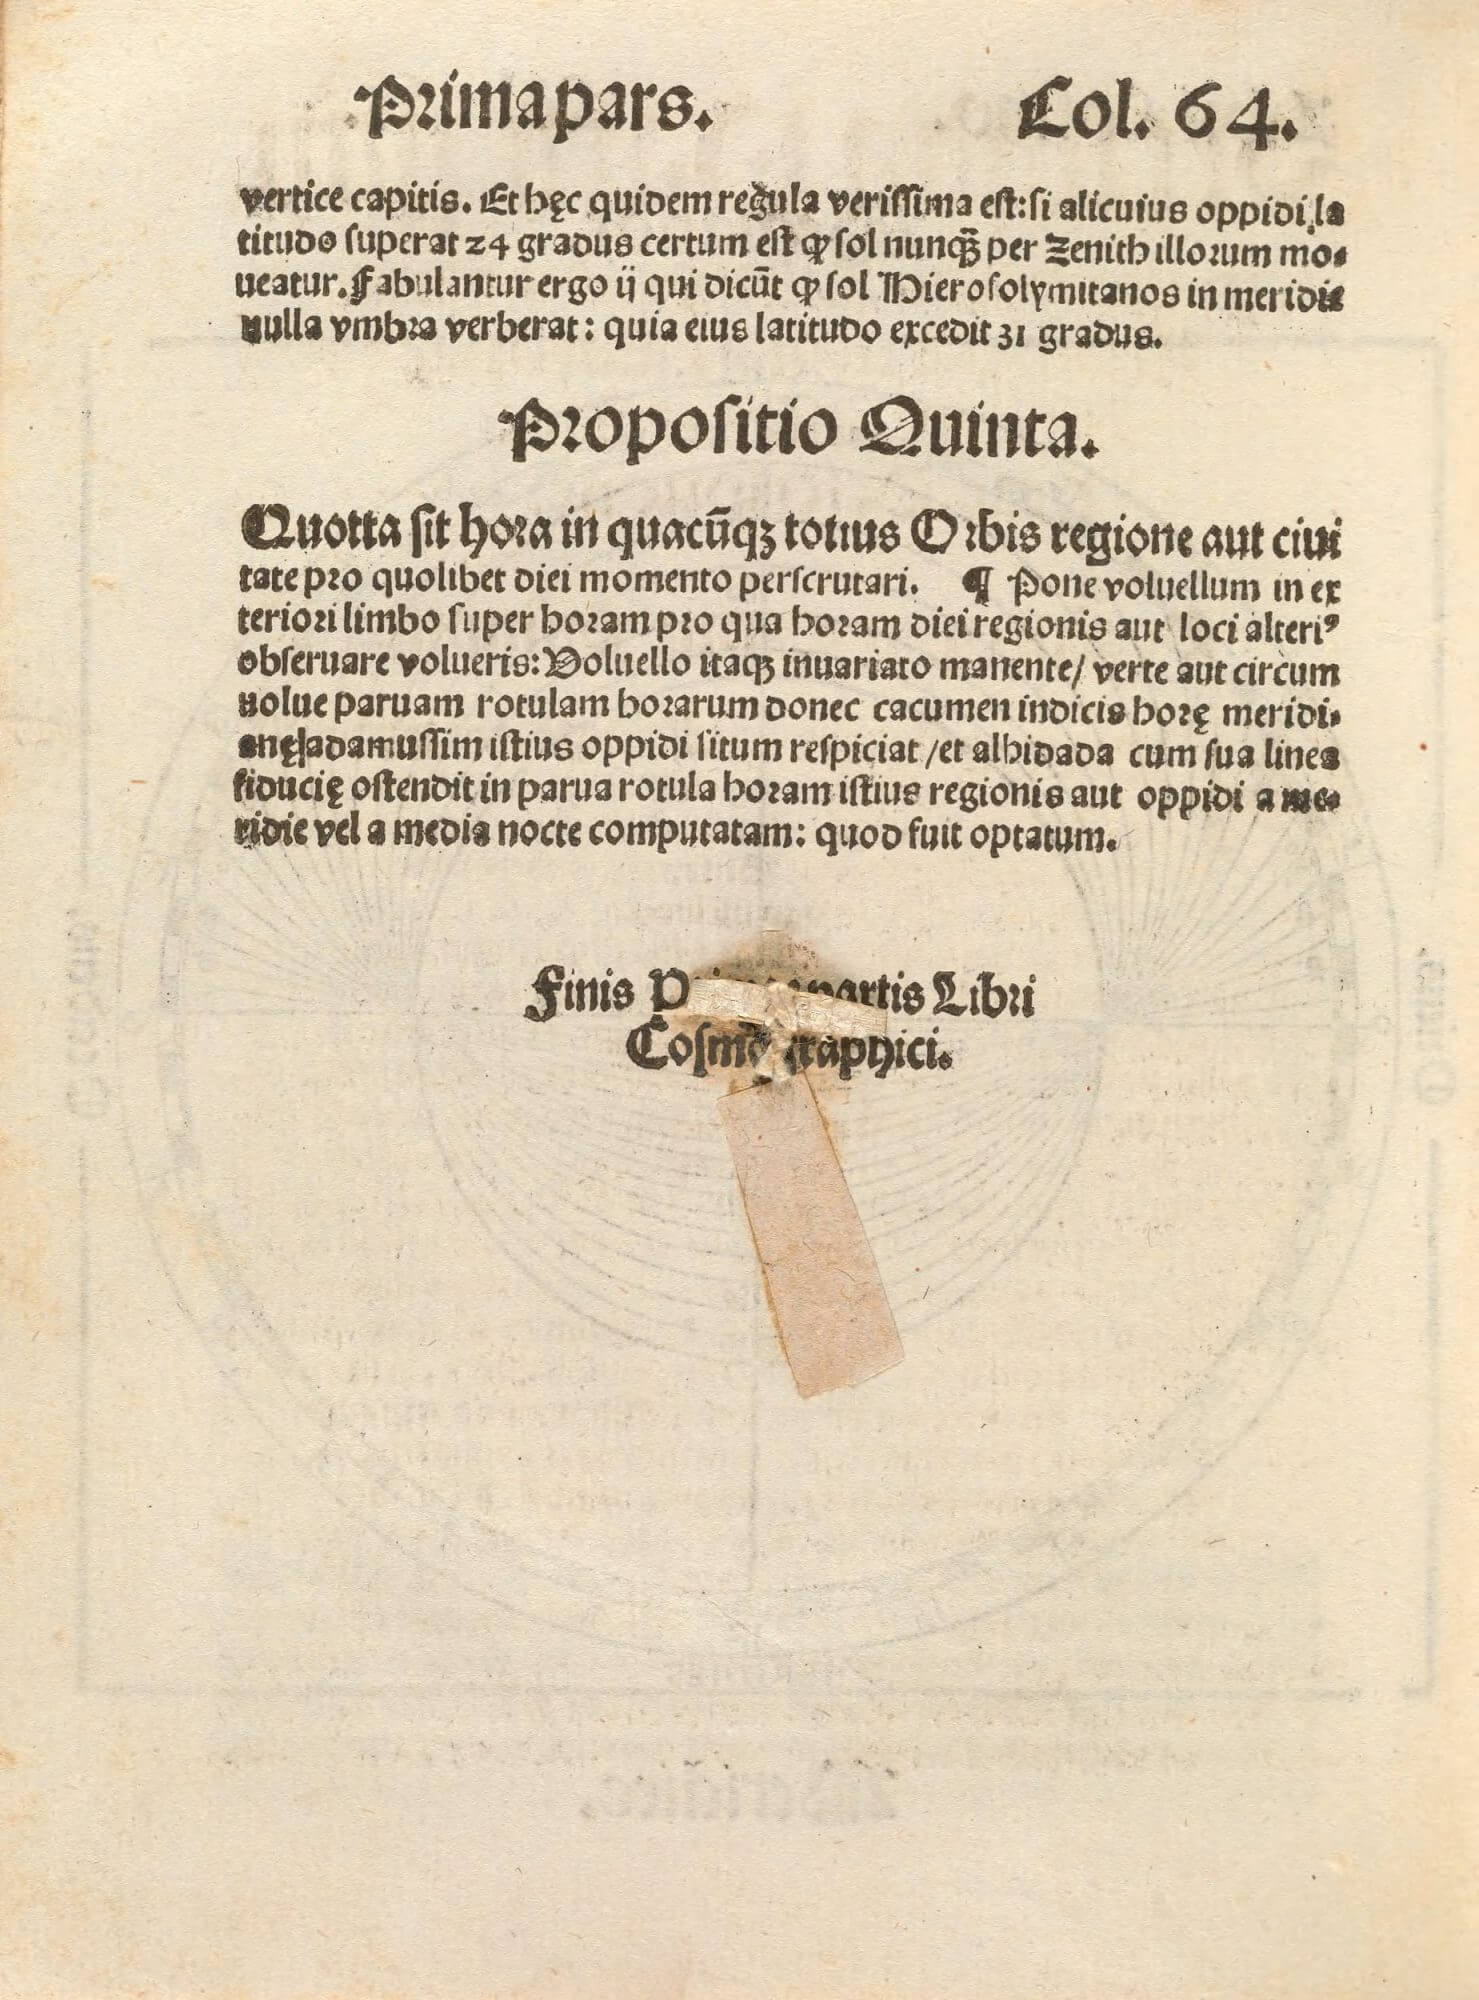 In this middle of this page, and obscuring some text, is the string and paper securing the discs of the volvelle on the other side of this leaf.